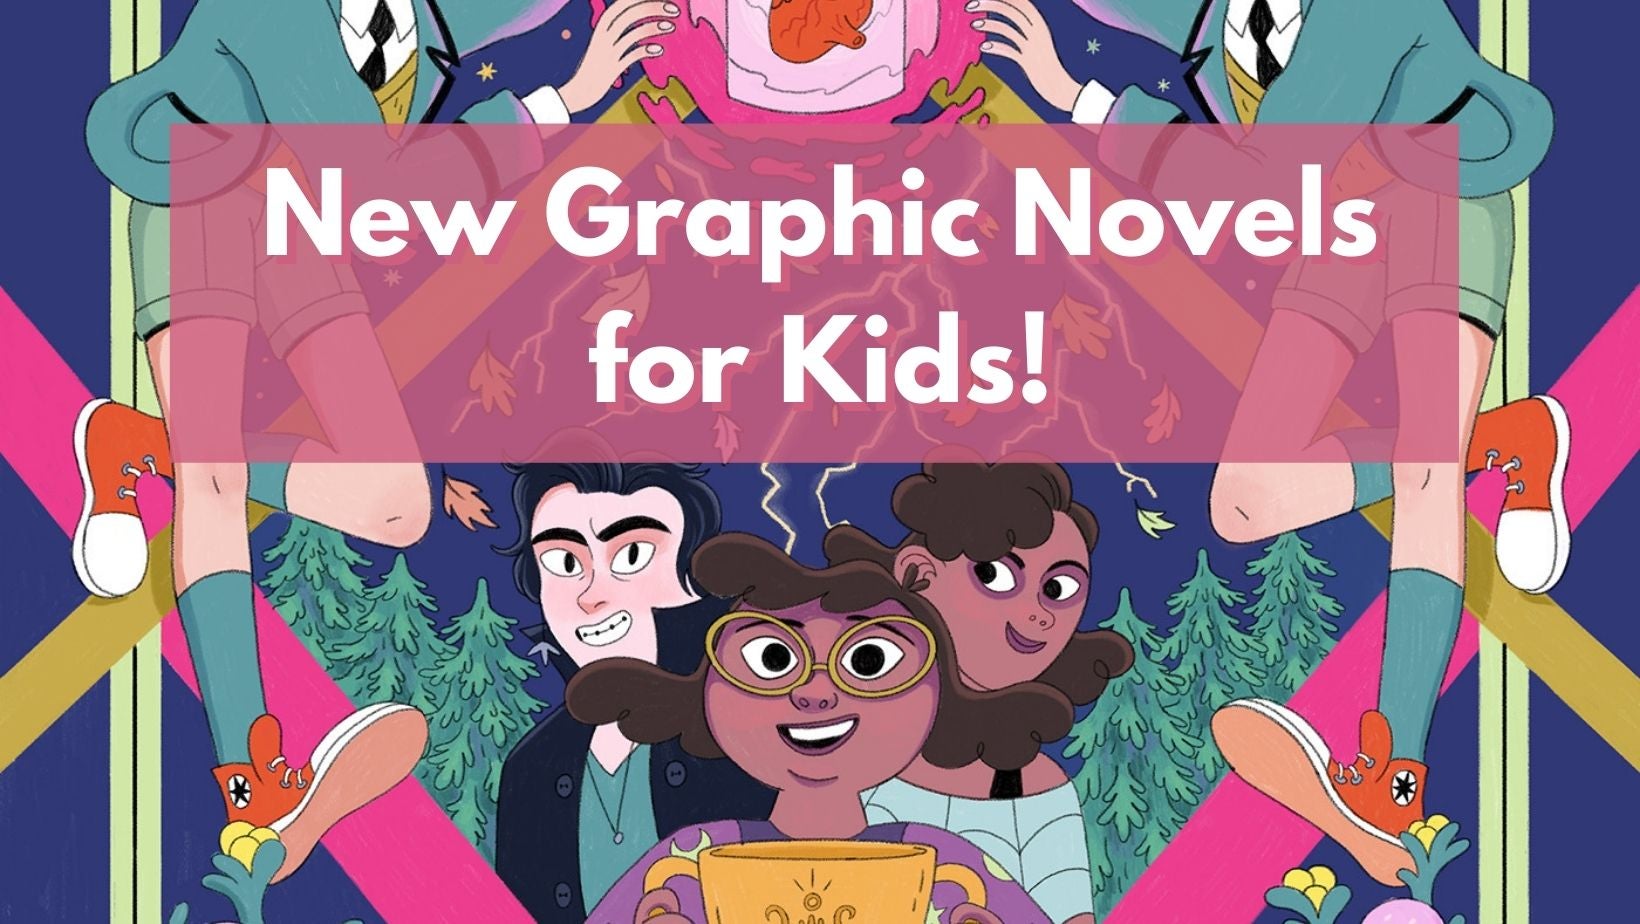 FALL in Love with Graphic Novels for Kids